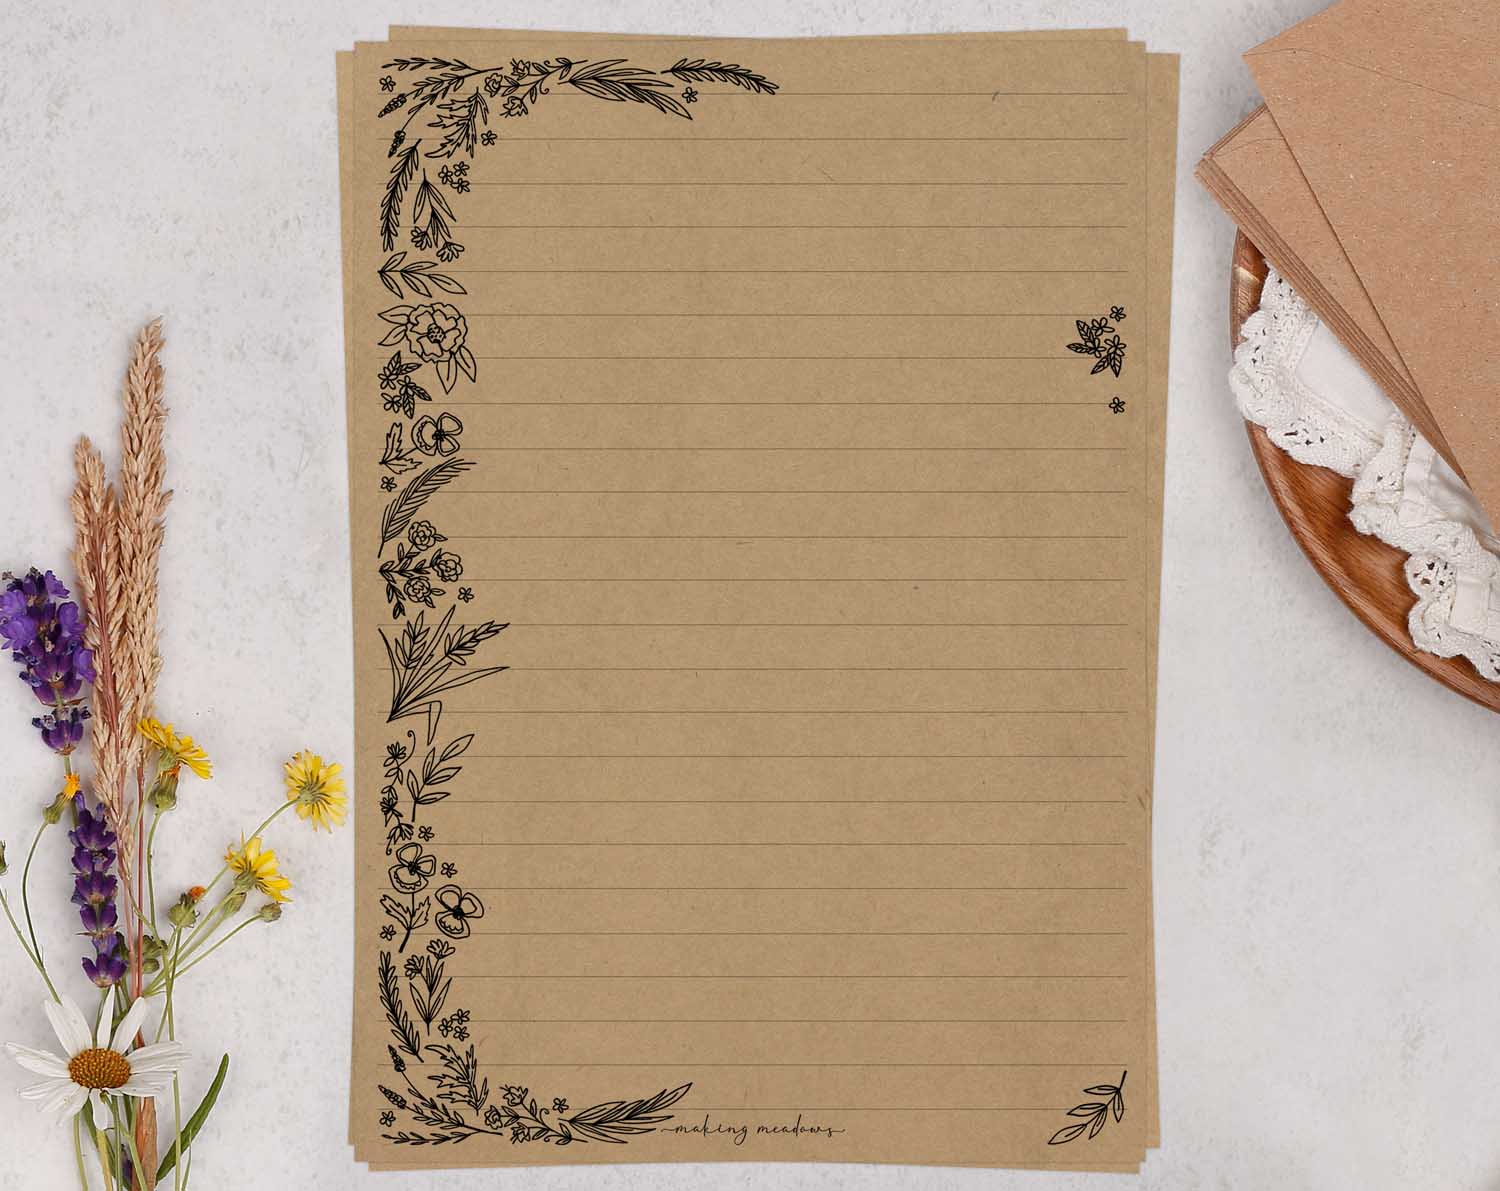 A5 Kraft letter writing paper sheets with monochrome floral design.